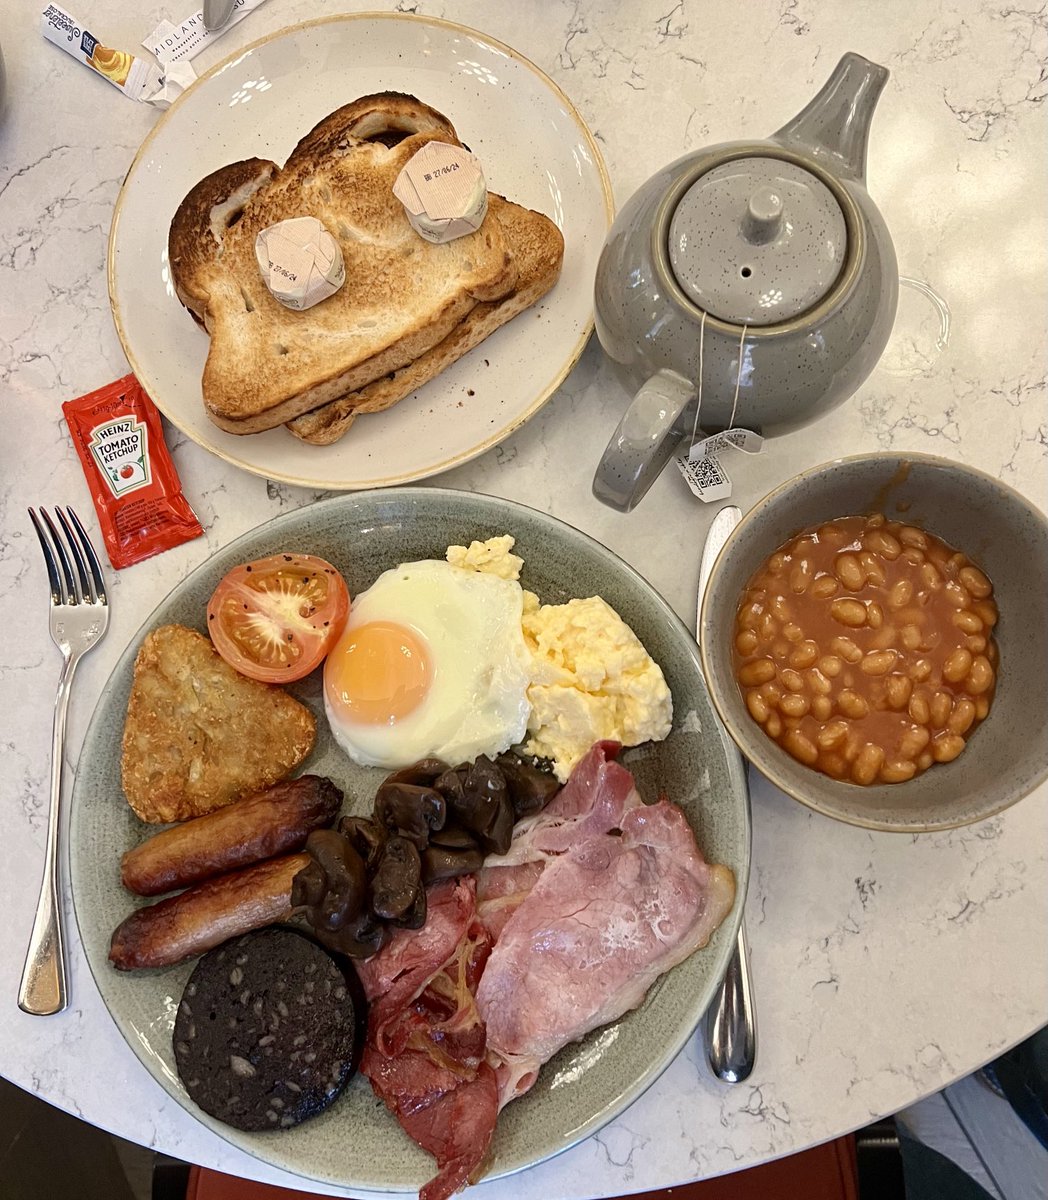 A fine fine self-curated breakfast ⁦@MidlandMCR⁩ ⁦@ResFamilyLaw⁩ #resconf24. Toast bisected on the horizontal. Beans in a separate receptacle. And a radical departure for me … black pudding.